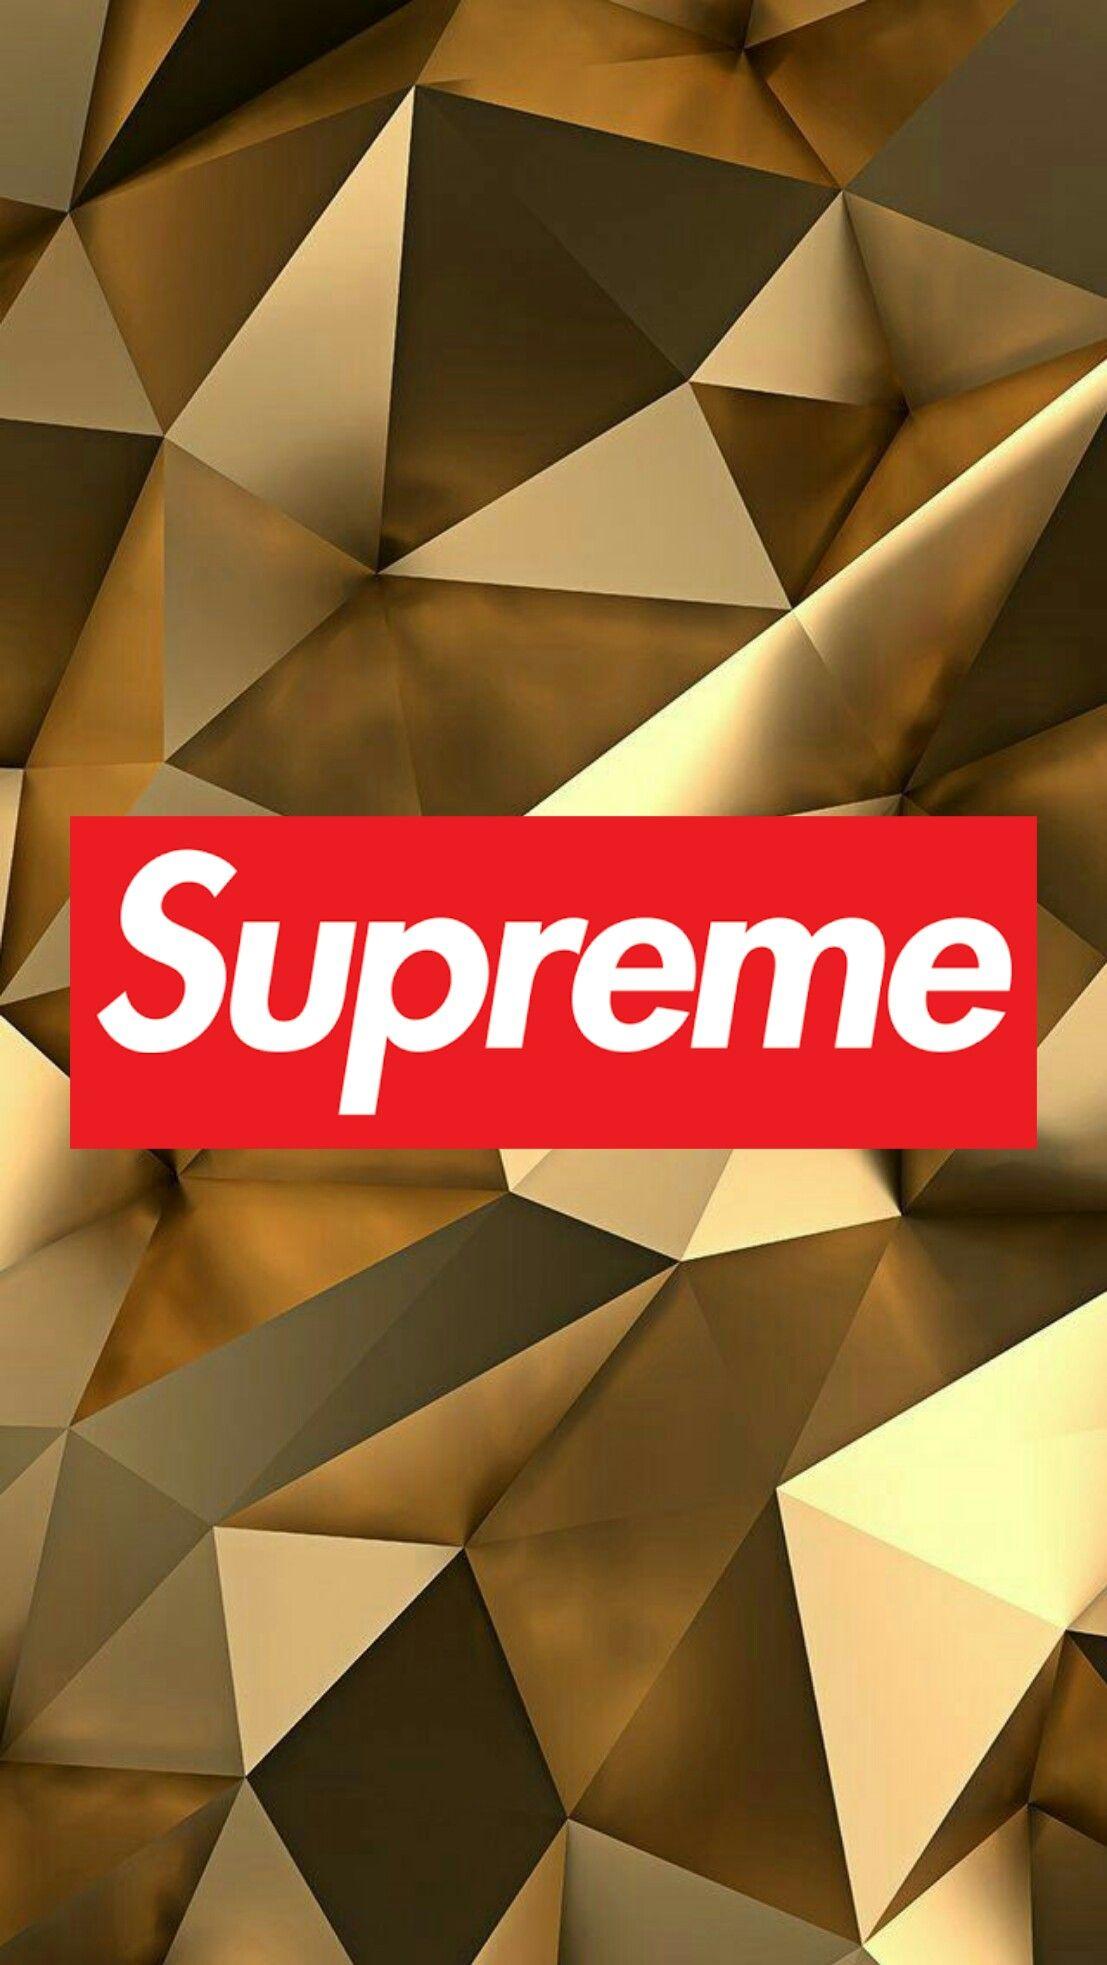 Awesome Louis Vuitton Gucci Wallpapers - WallpaperAccess  Supreme iphone  wallpaper, Supreme wallpaper, Louis vuitton iphone wallpaper